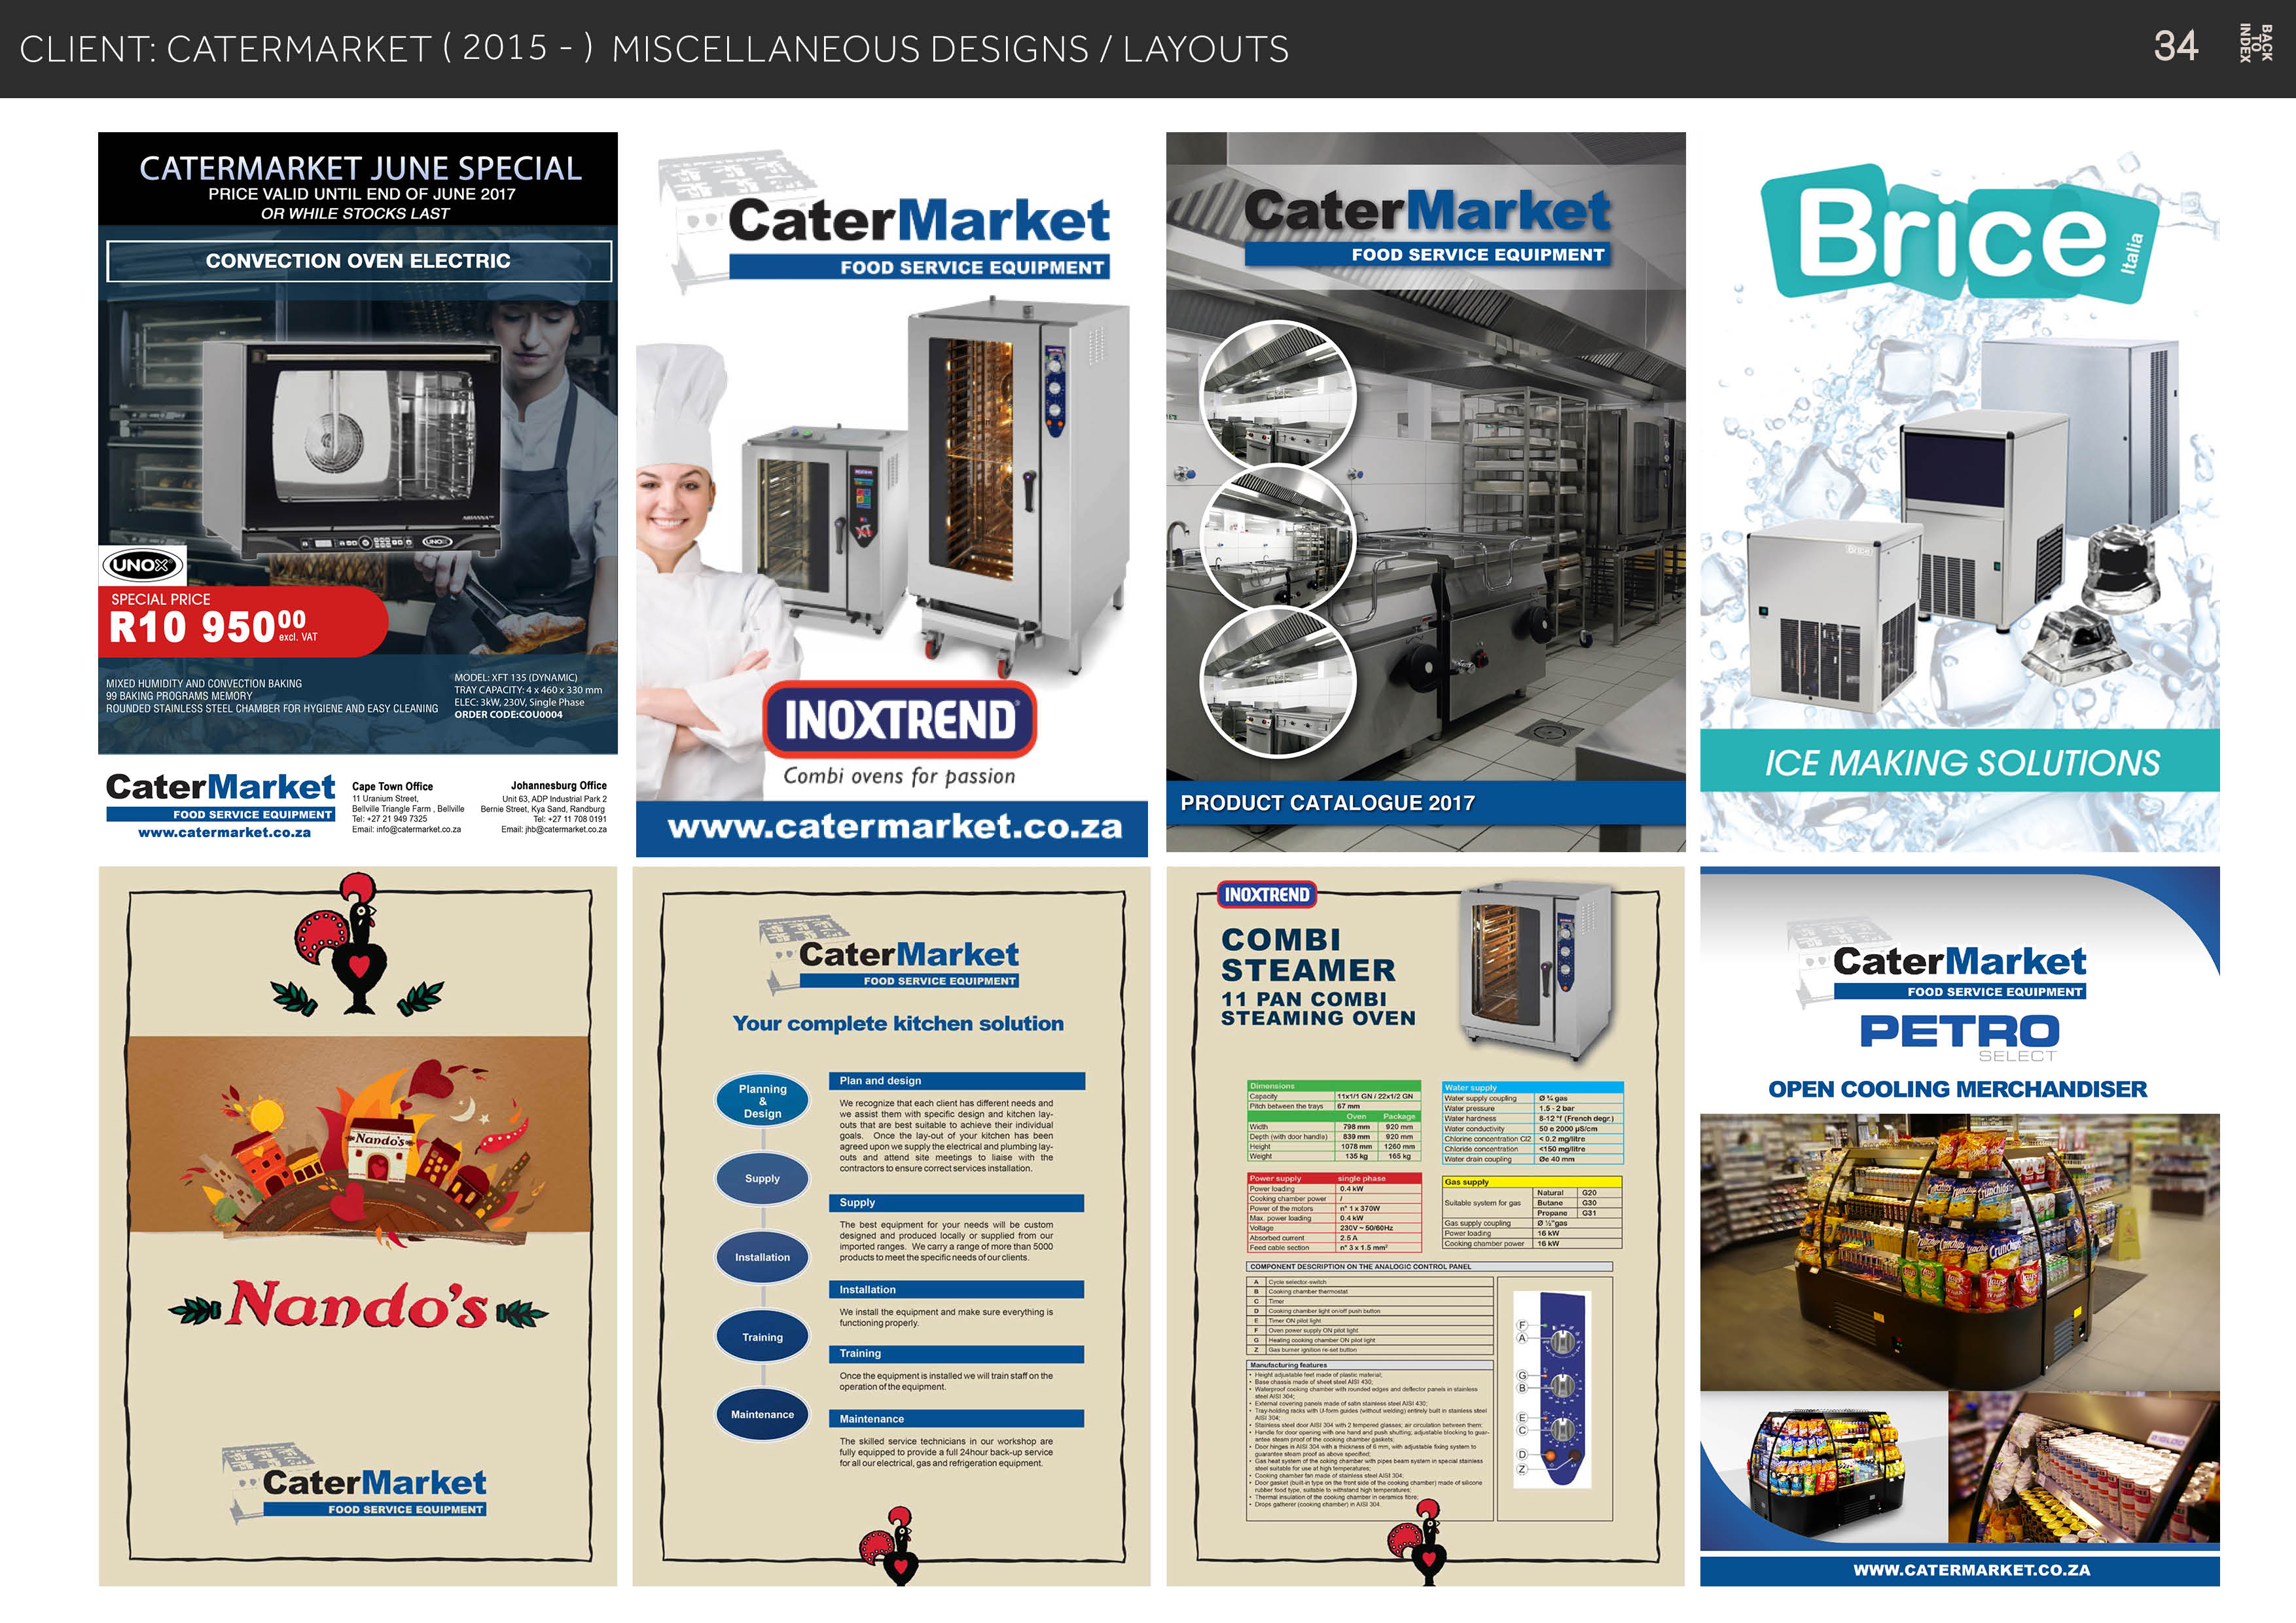 CLIENT: CATERMARKET (2015 -) MISCELLANEOUS DESIGNS / LAYOUTS

 

CATERMARKET JUNE SPECIAL

PRICE VALID UNTIL END OF JUNE 2017

Ata CaterMarket
SONVEGTION OVERFEFECTHIG

~ WV

-

PRICE

oF R 9509,

  

LE NE Ao Reha

 

! ICE MAKING SOLUTIONS

Johannesburg Office Combi ovens for passion

CEE RT TN Tg (A Re KL
[10 q1:(31)

ER COMBI
EET 11 PAN COMBI

Your complete kitchen solution STEAMING OVEN PETRO

C— rr . OPEN COOLING MERCHANDISER
Design 2 Z S! BL

CaterMarket

ITT Oo

www.catermarket.co.za

 

We recognize that each chent has Gferent needs and
We assist them with Specific design and kichen lay.
Outs that are Dest sutable to achieve thew inchidual

OO eae rpiy nd ing
ET

The best equipment for your needs will be custom

designed and produced locally of supplied rom our
imported ranges. We cary a range of more than 5000
ProSuCtS 10 Meet ihe specific needs of our clents

RT eT eer
Erie

Once the equipment is instased we wil rain staff on the
operaton of the equipment

= The skied service technicians in our workshop are

hE re ES a
for a ur electrical. gas and refrigeration equipment

 

 

ve ~’CaterMarket
#

 

 

 

WWW.CATERMARKET.CO.ZA